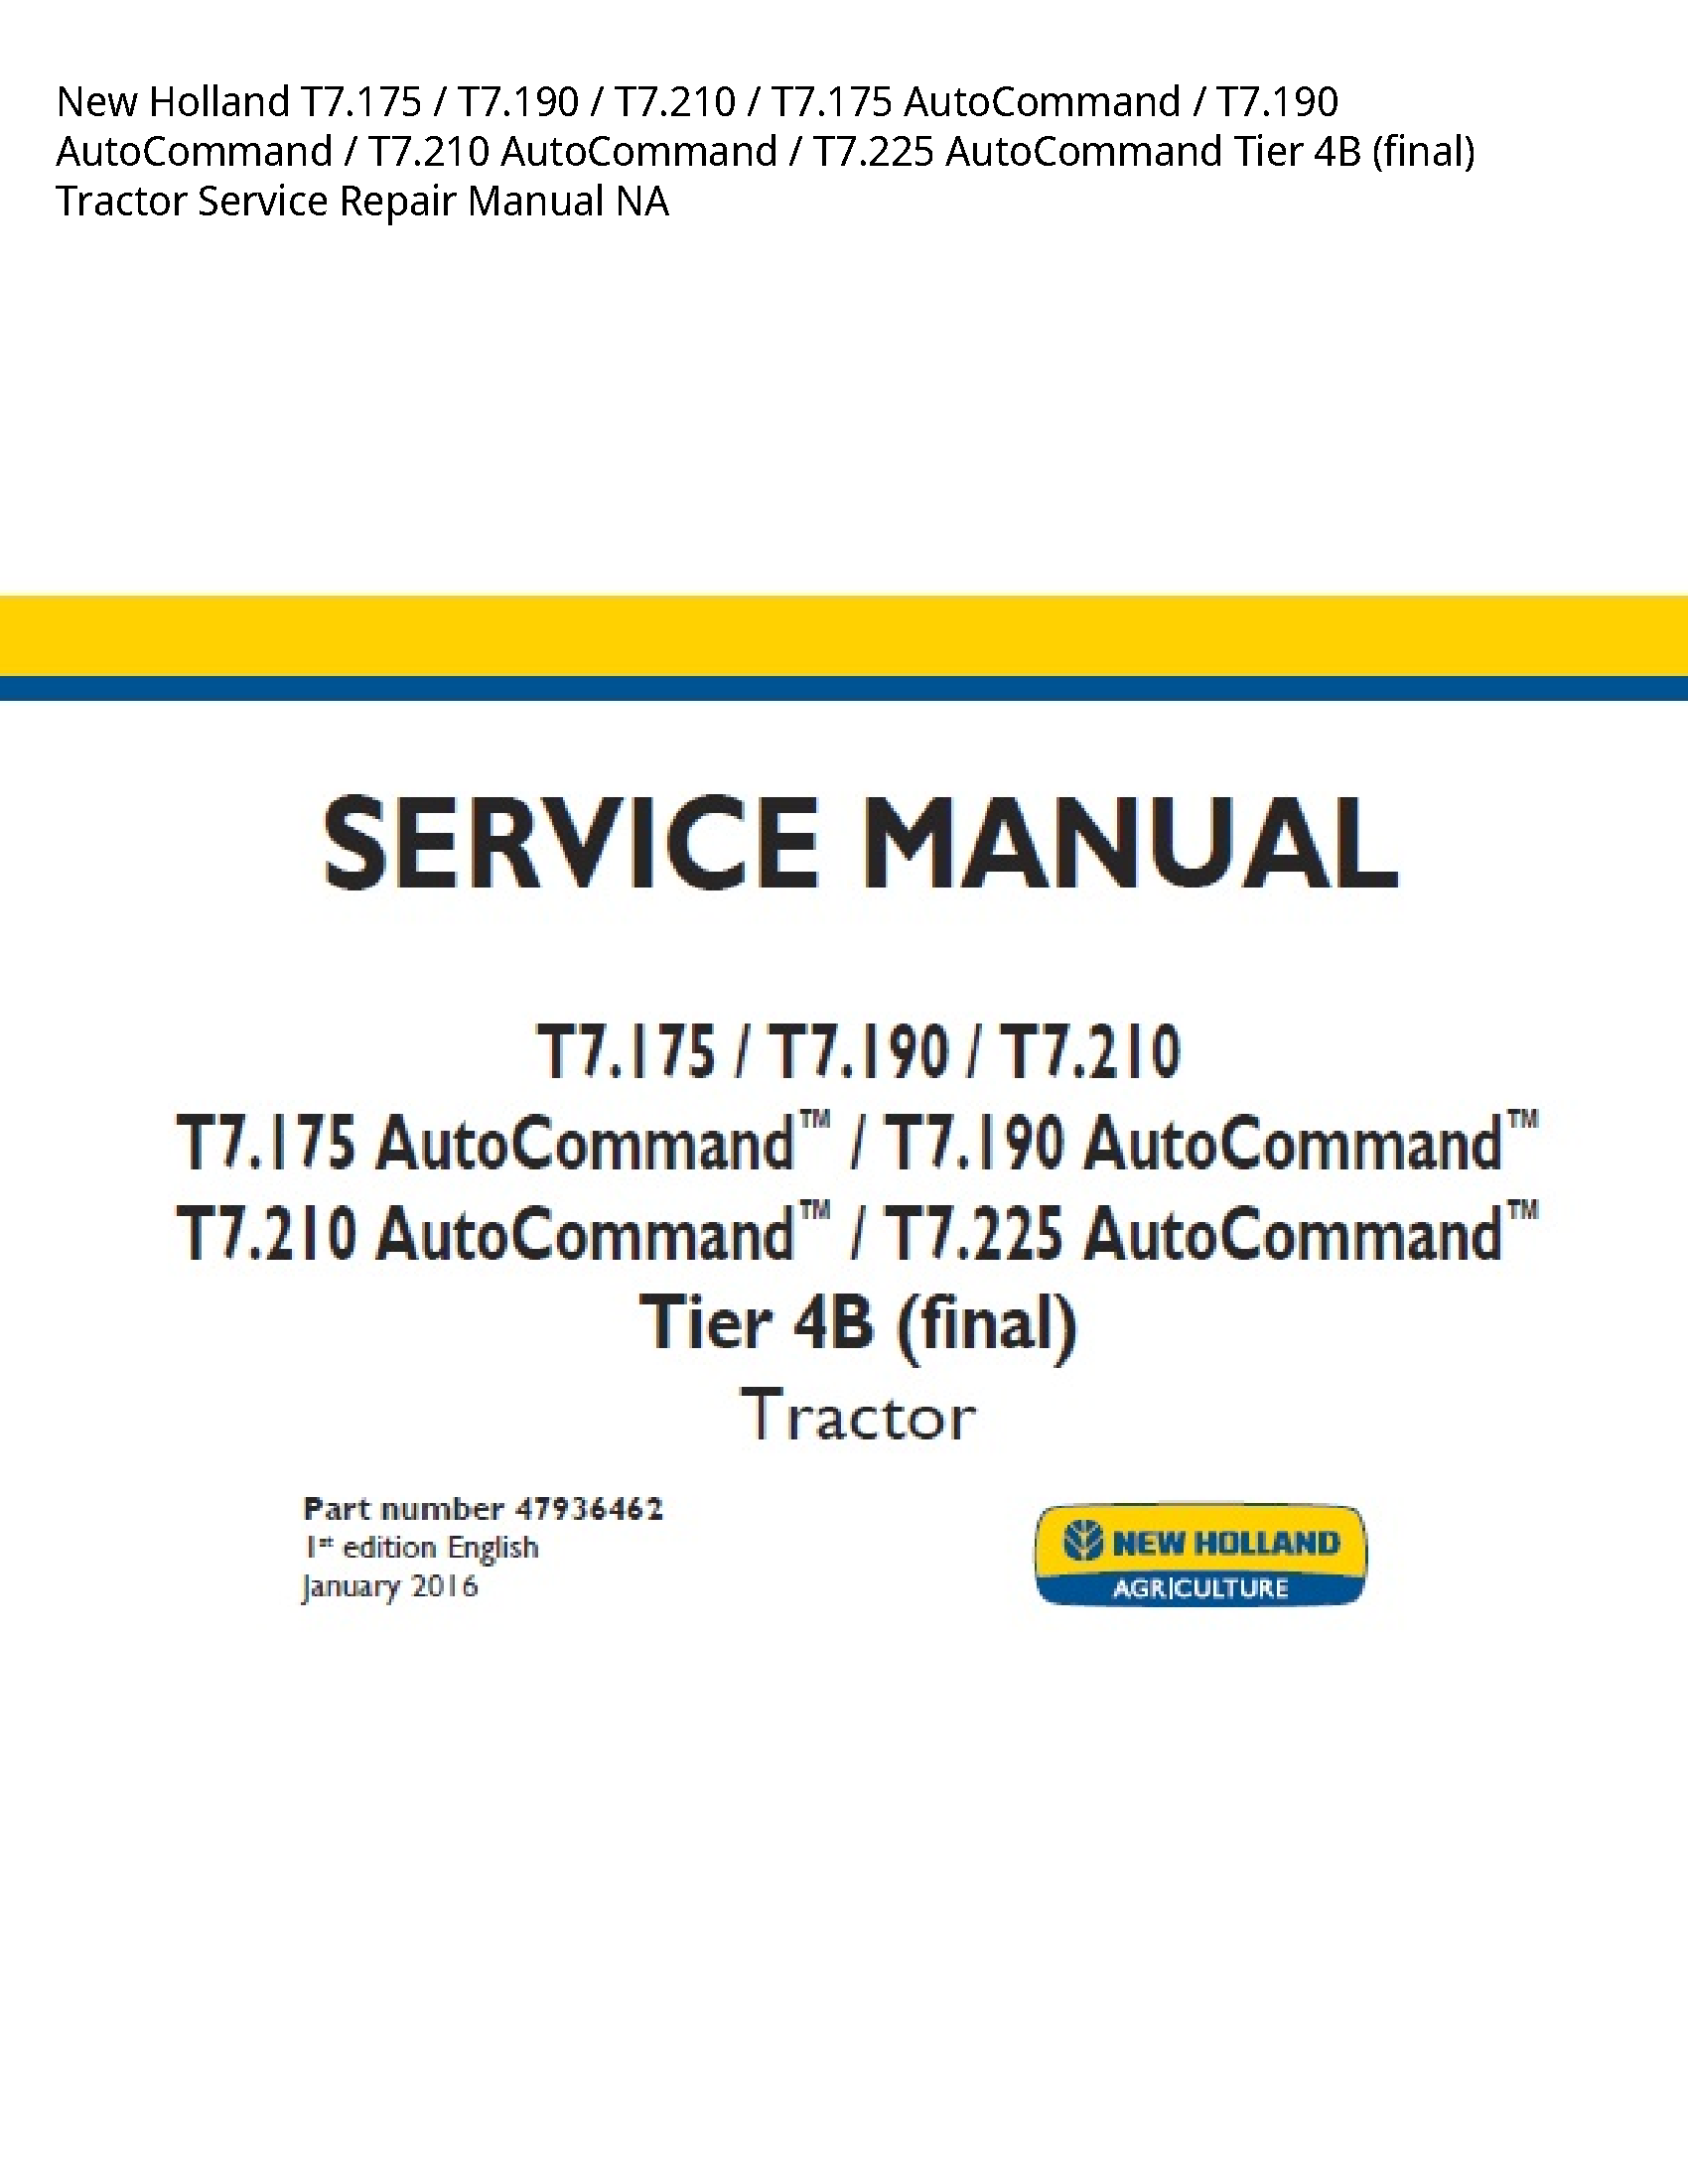 New Holland T7.175 AutoCommand AutoCommand AutoCommand AutoCommand Tier (final) Tractor manual